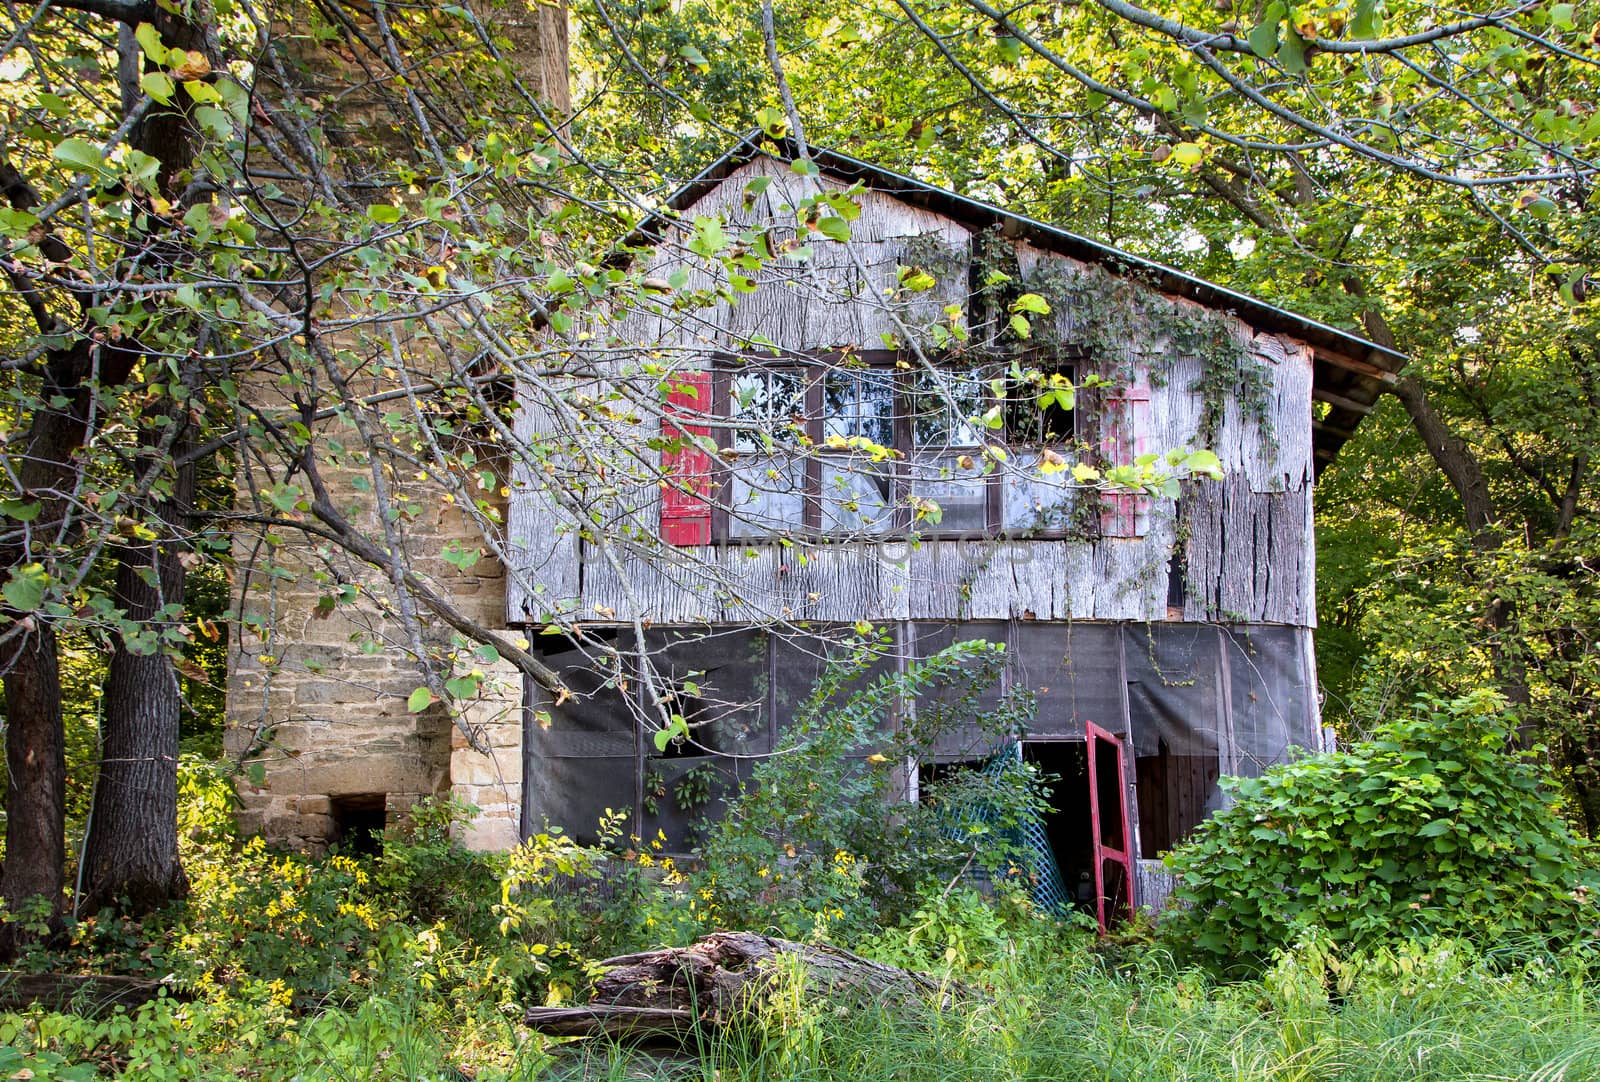 A dilapidated house sits abandoned on the banks of the St. Croix River